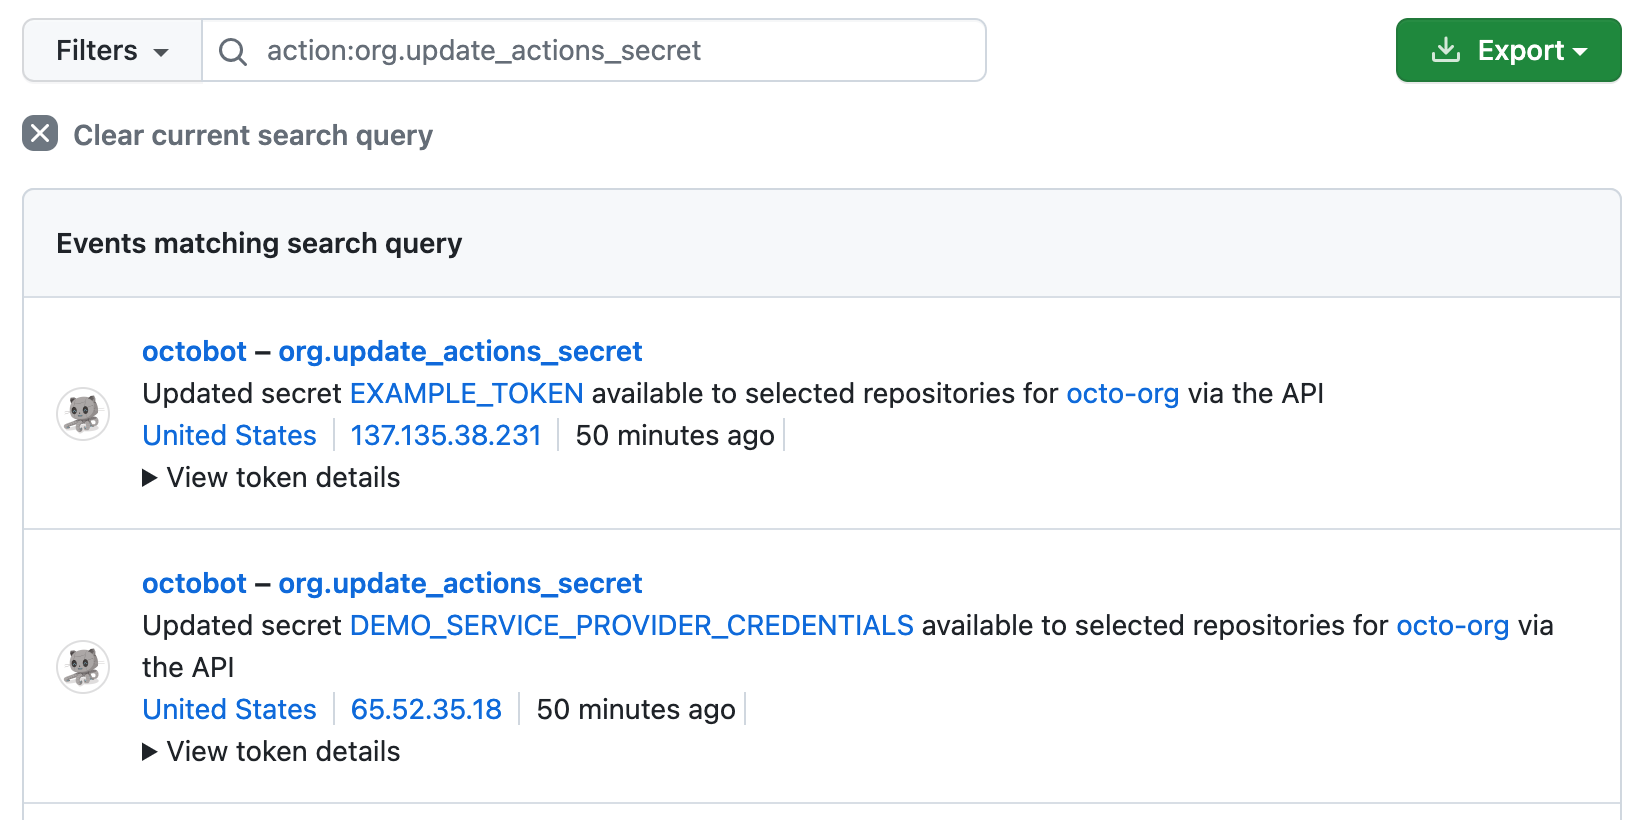 Screenshot showing a search for "action:org.update_actions_secret" in the audit log for an organization. Two results detail API updates to two secrets that are available to selected repositories.